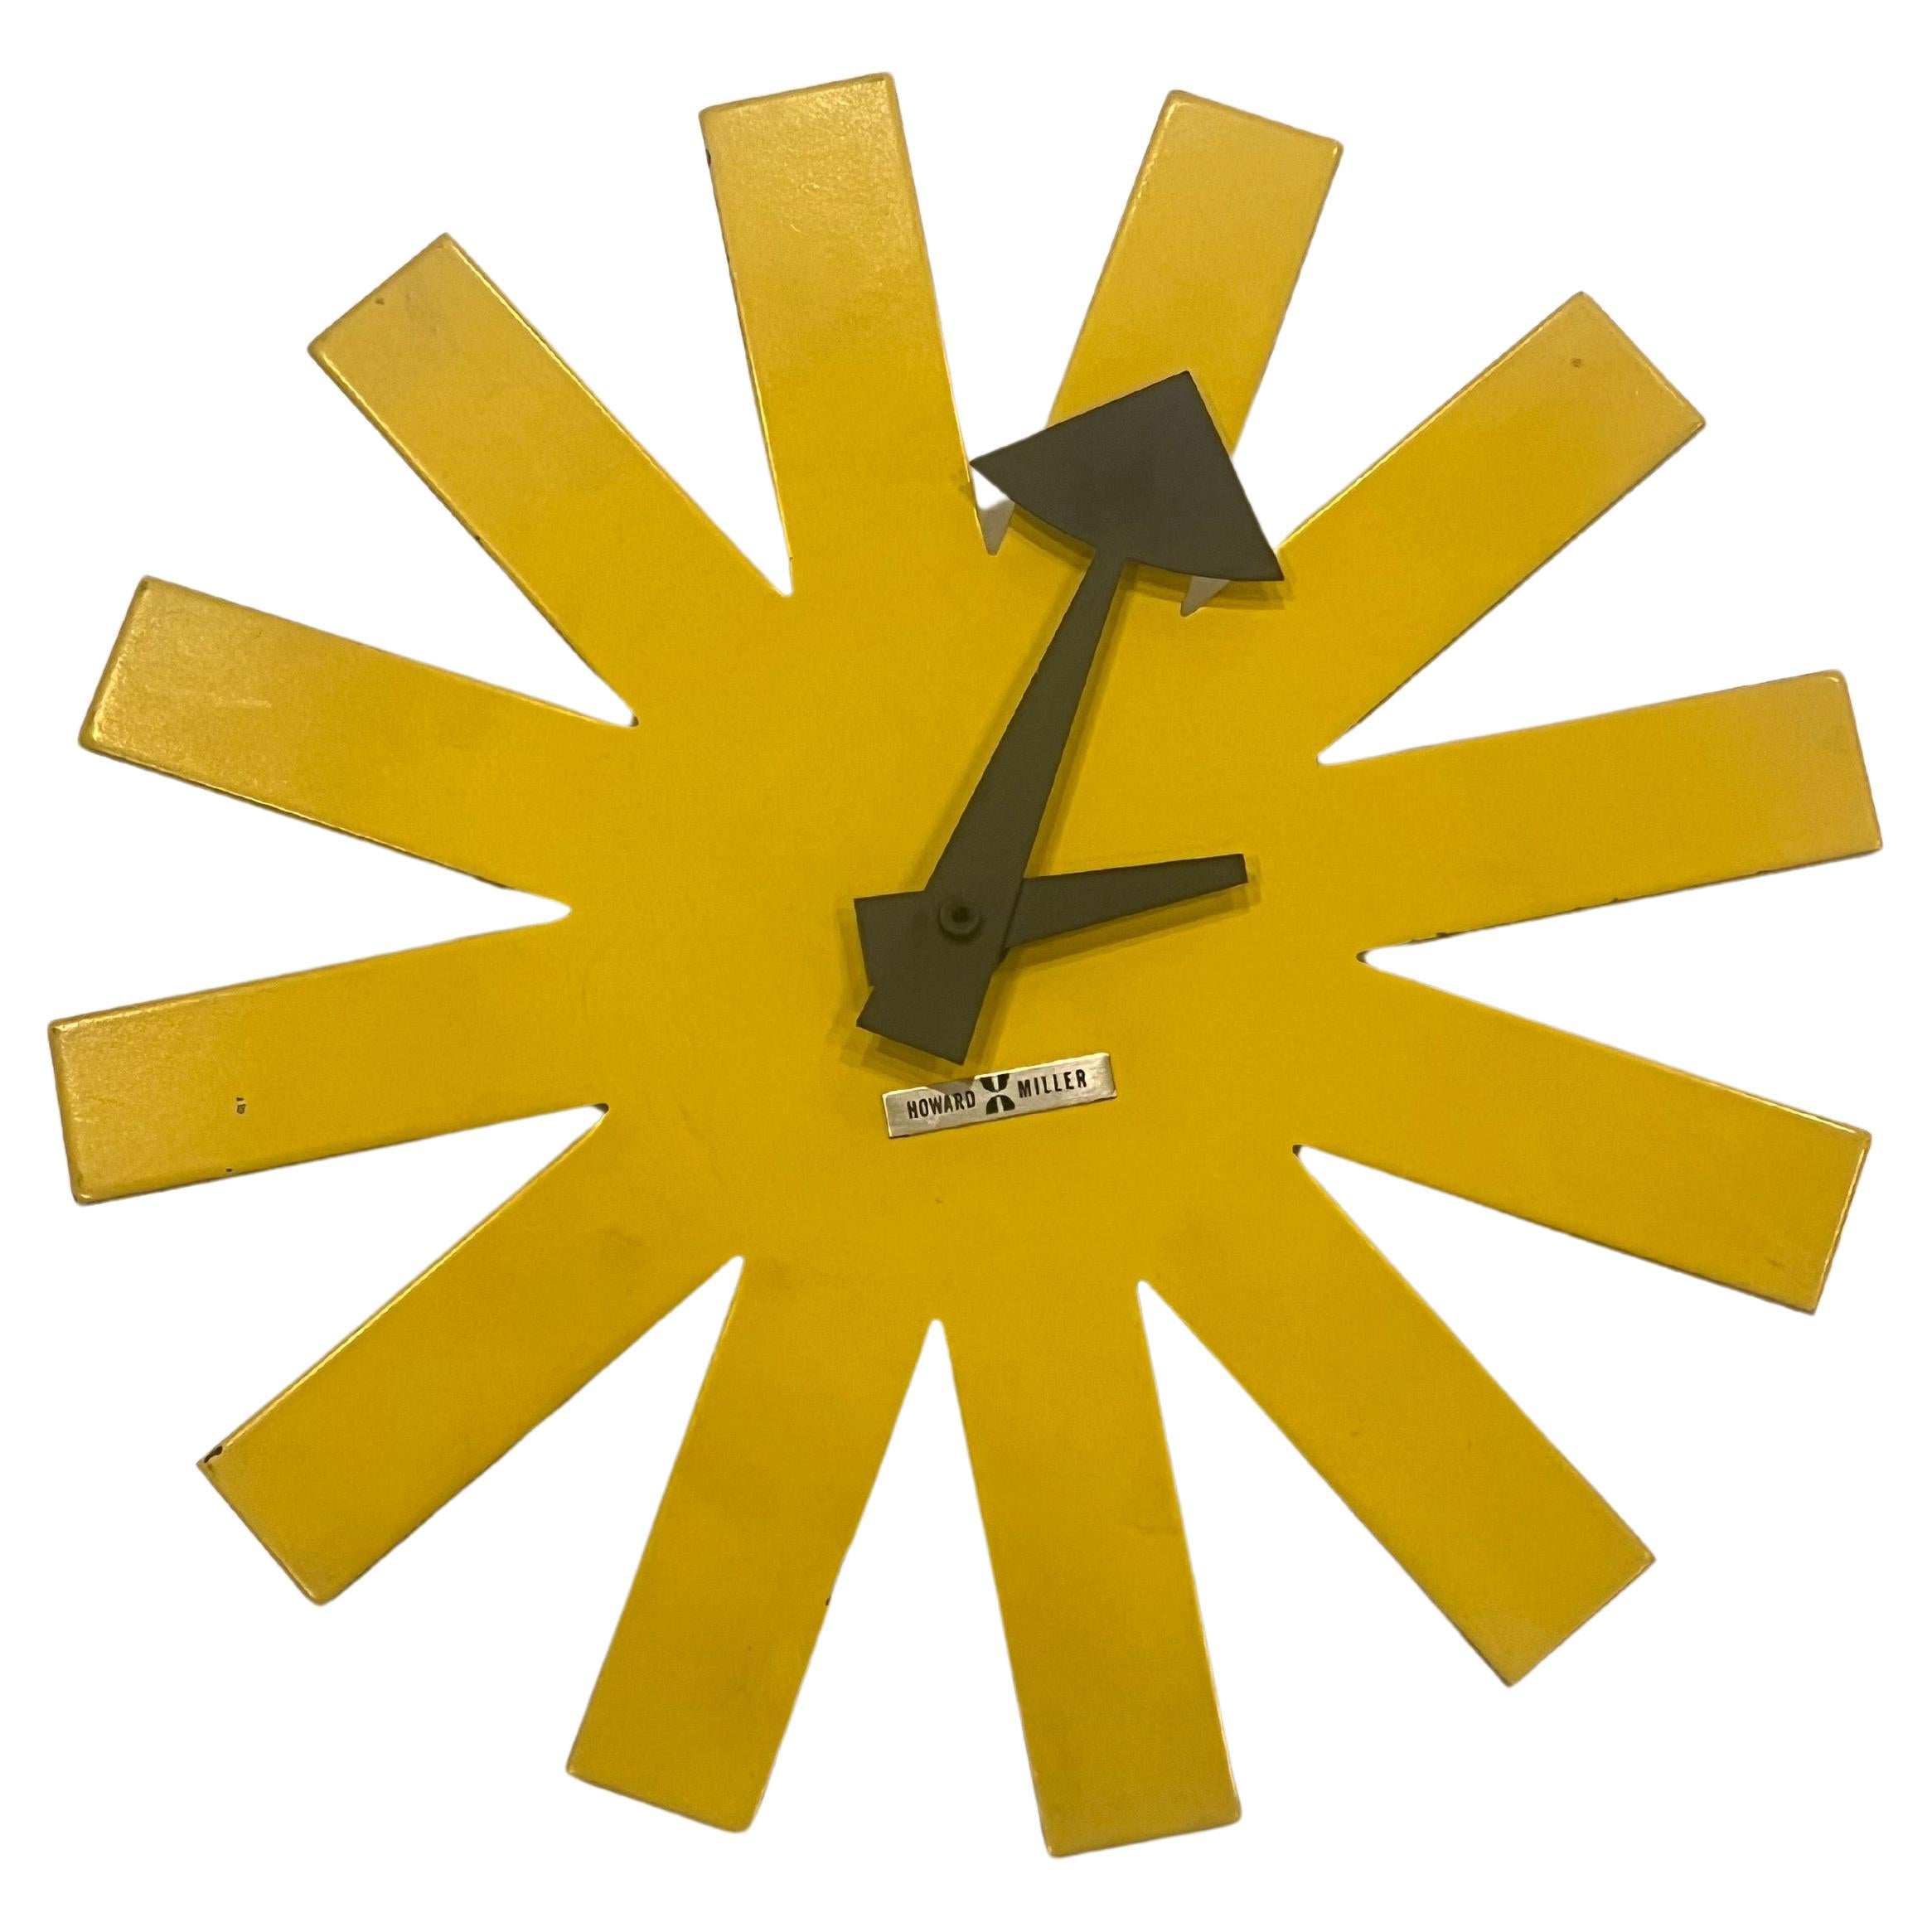 Iconic rare asterisk wall clock designed by George Nelson for Howard Miller circa 1970s, rare yellow color enameled metal battery operated movement very nice original condition.